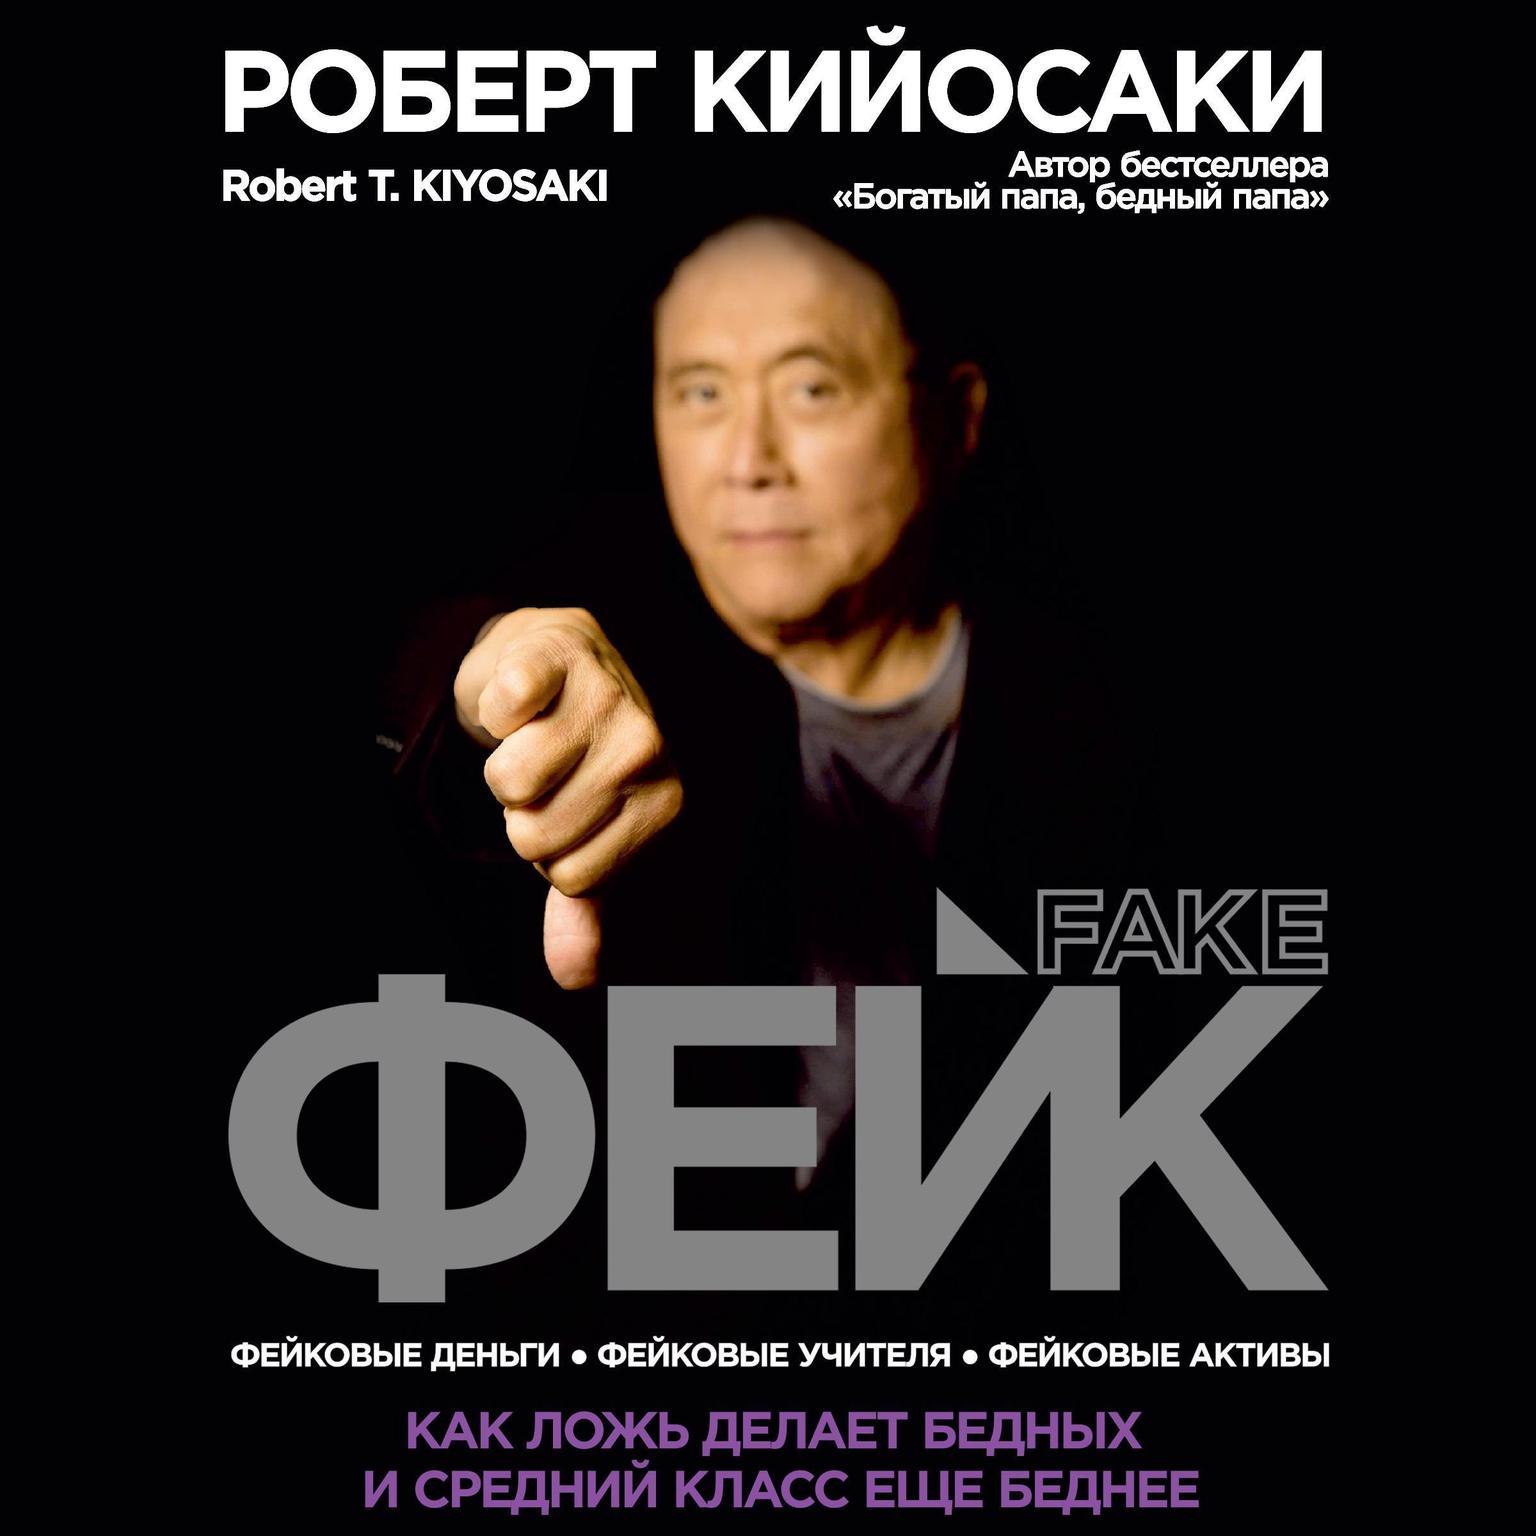 FAKE [Russian Edition]: Fake Money, Fake Teachers, Fake Assets: How Lies Are Making the Poor and Middle Class Poorer Audiobook, by Robert T. Kiyosaki